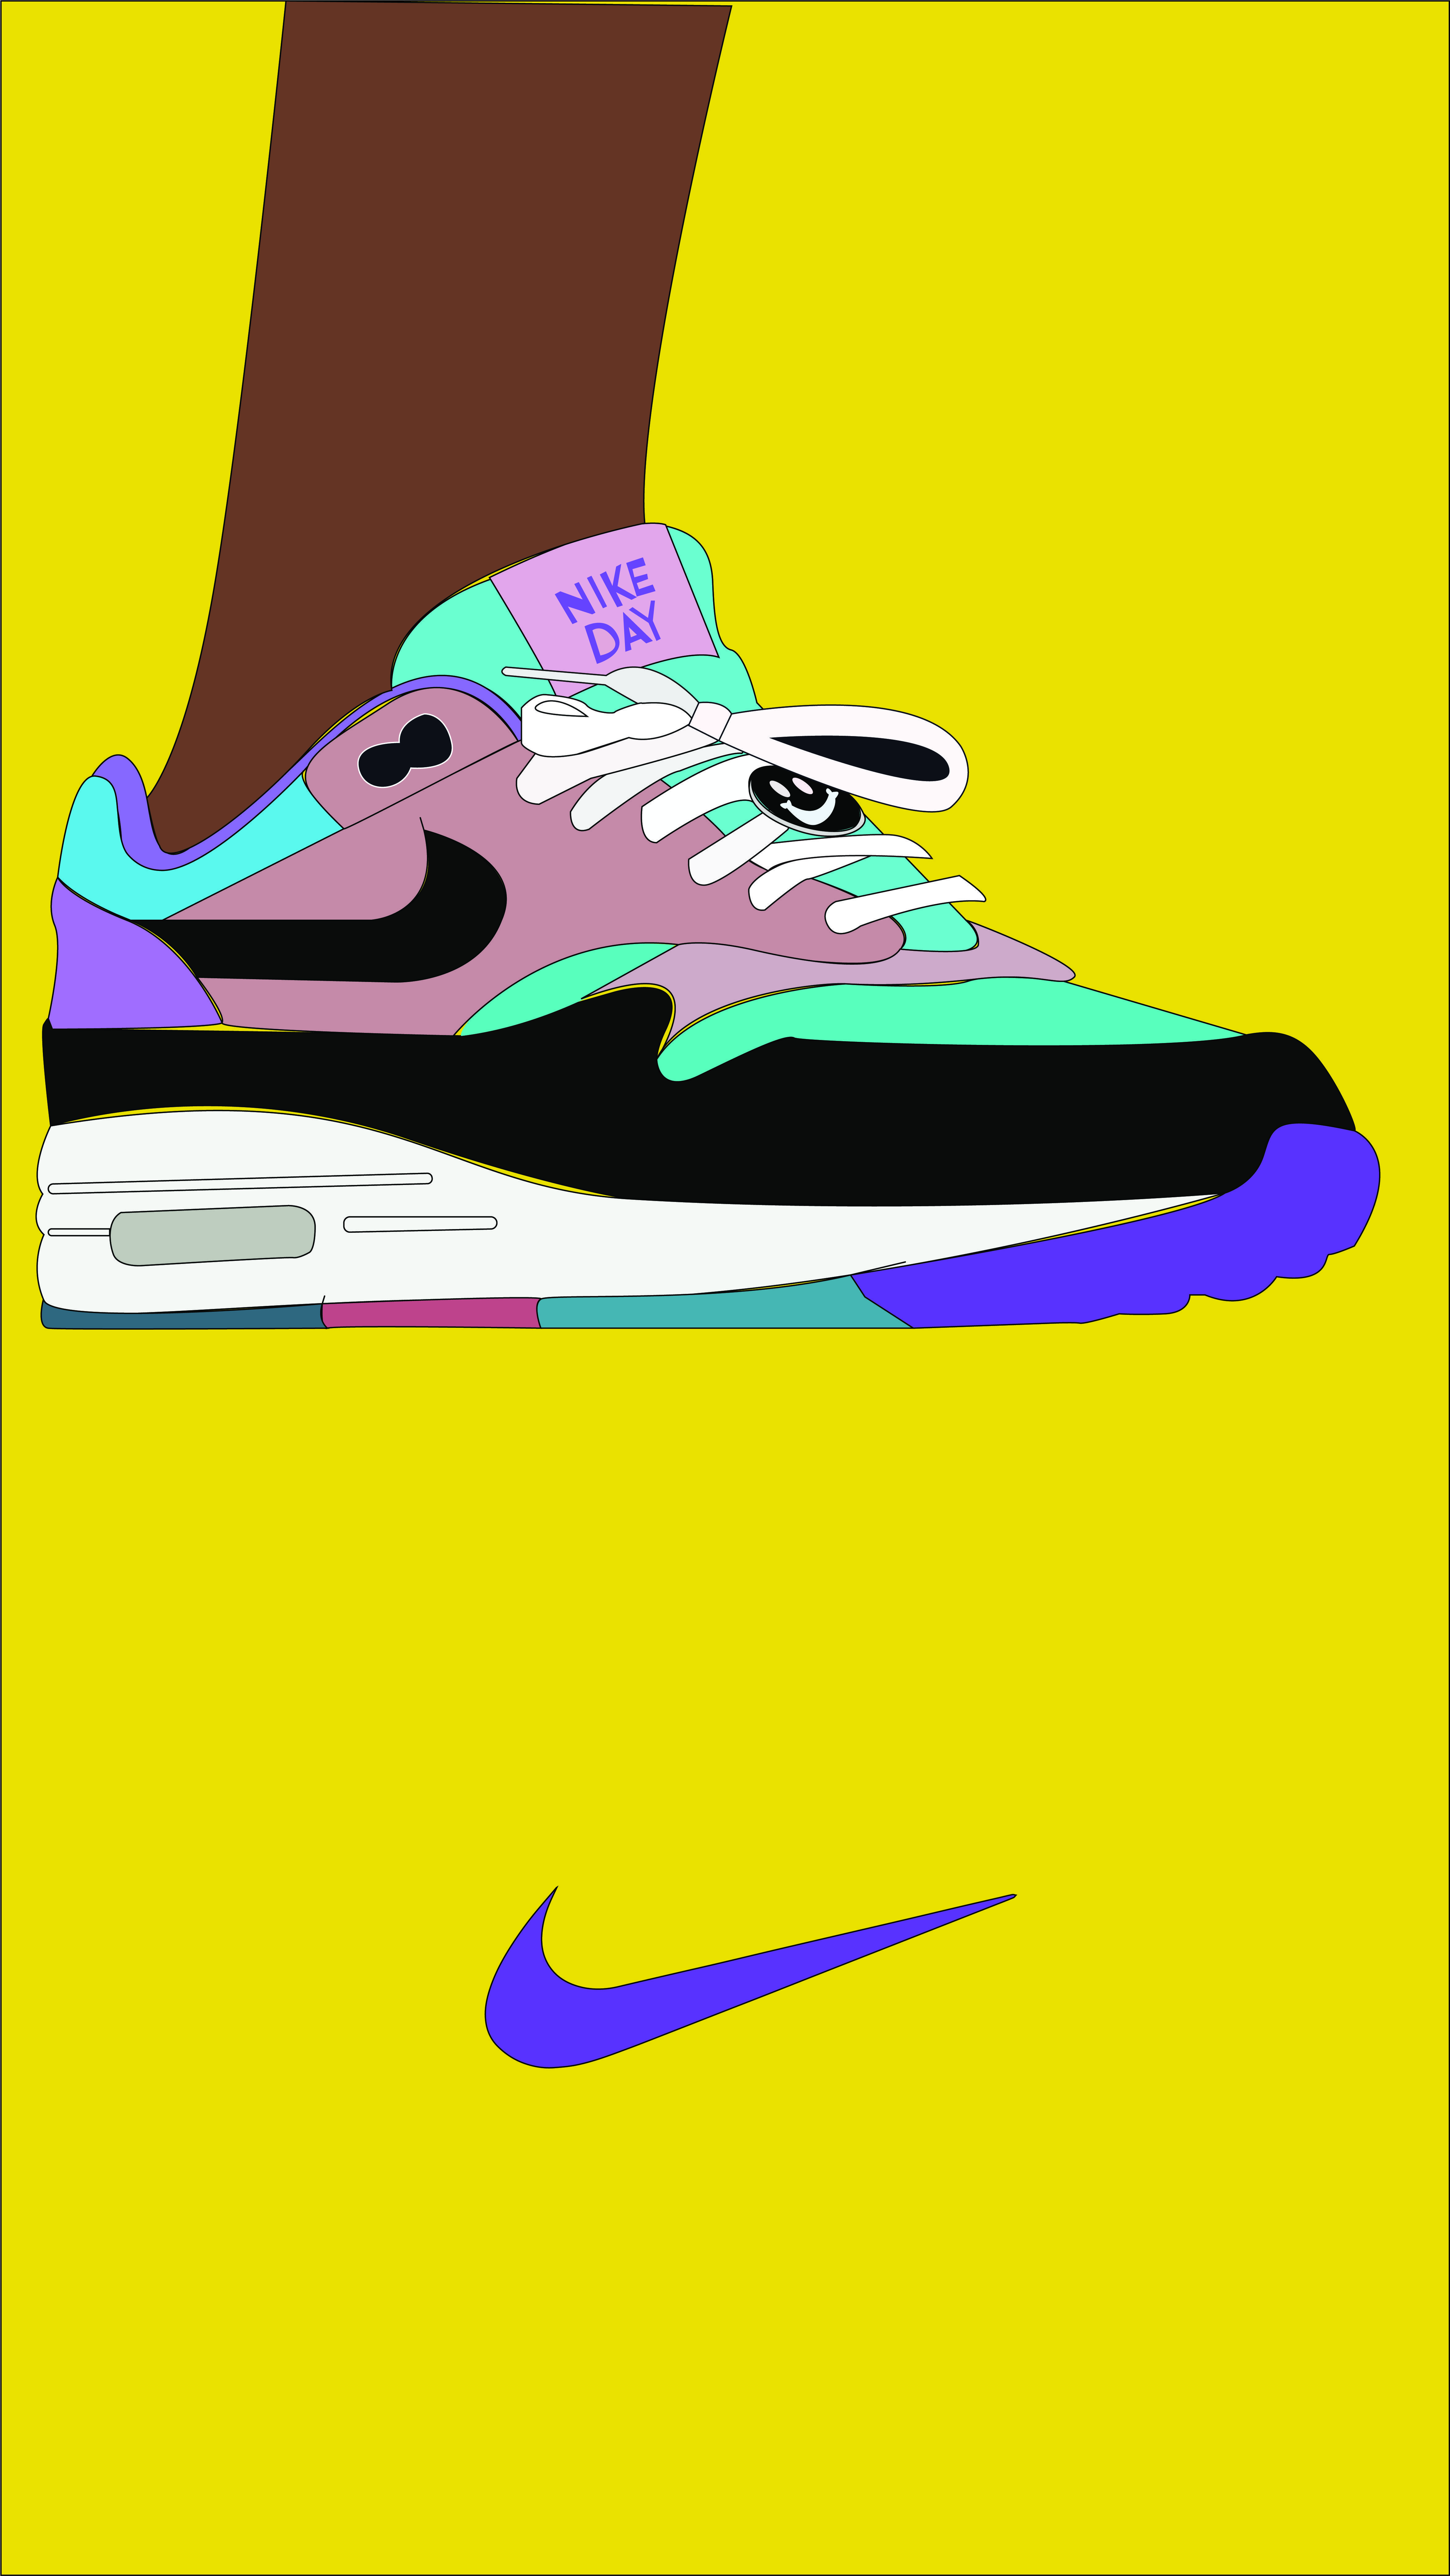 Nike AirMax 1 “Have a nice day”